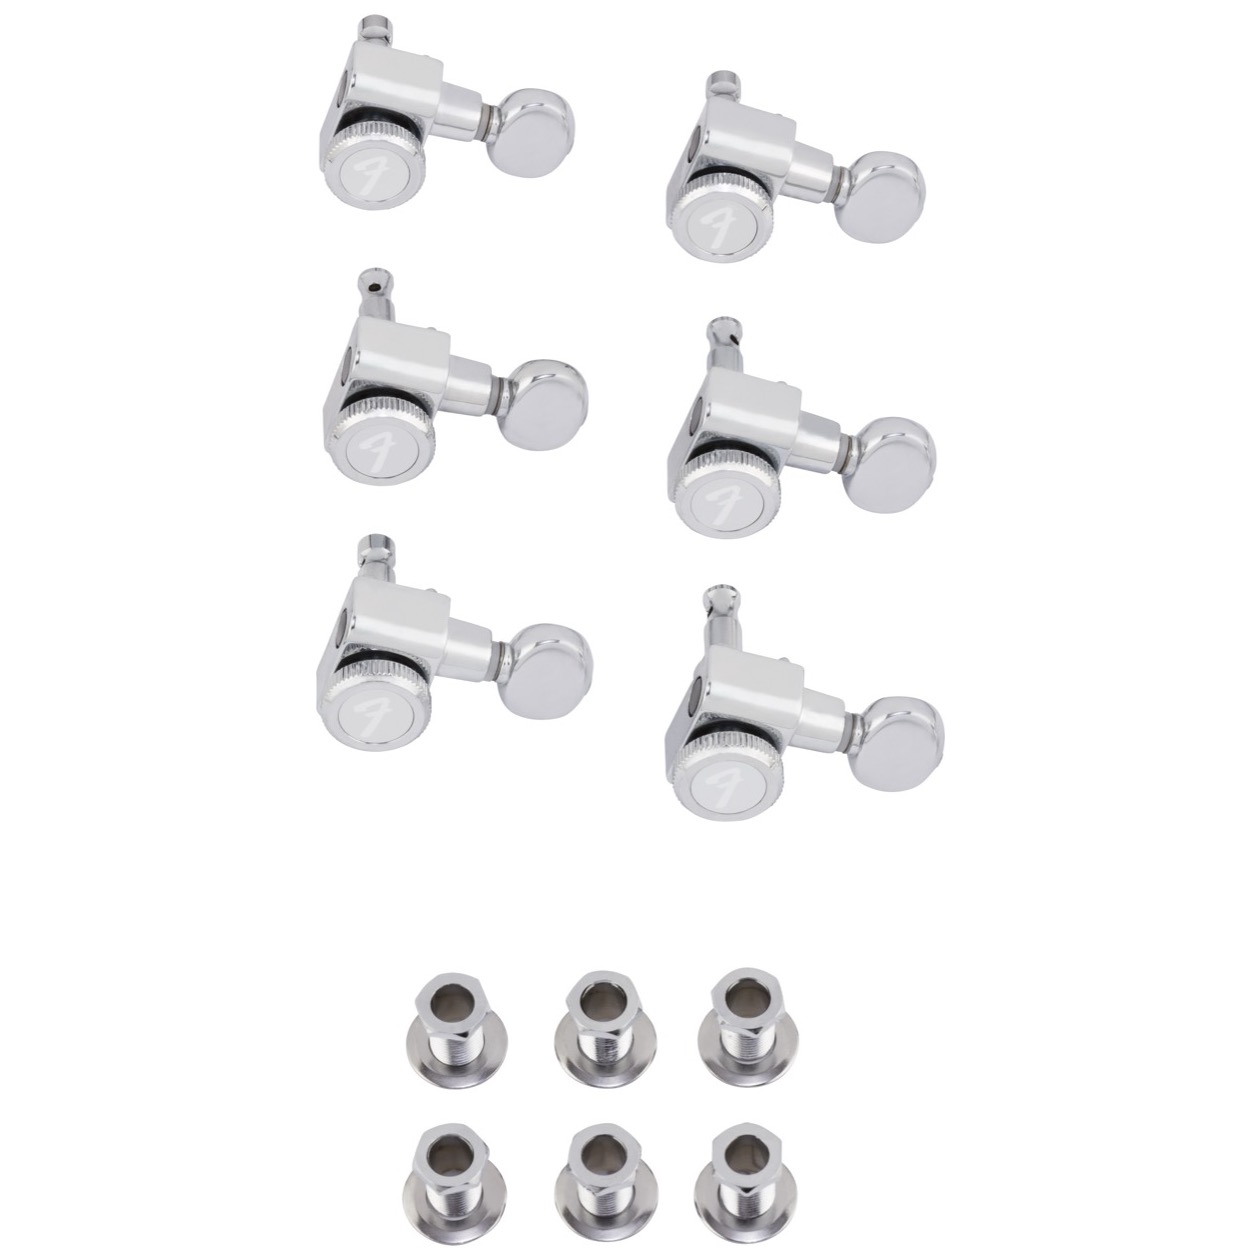 Fender Staggered Locking Tuners with Vintage-Style Buttons, Polished Chrome (6) Model 0990818500